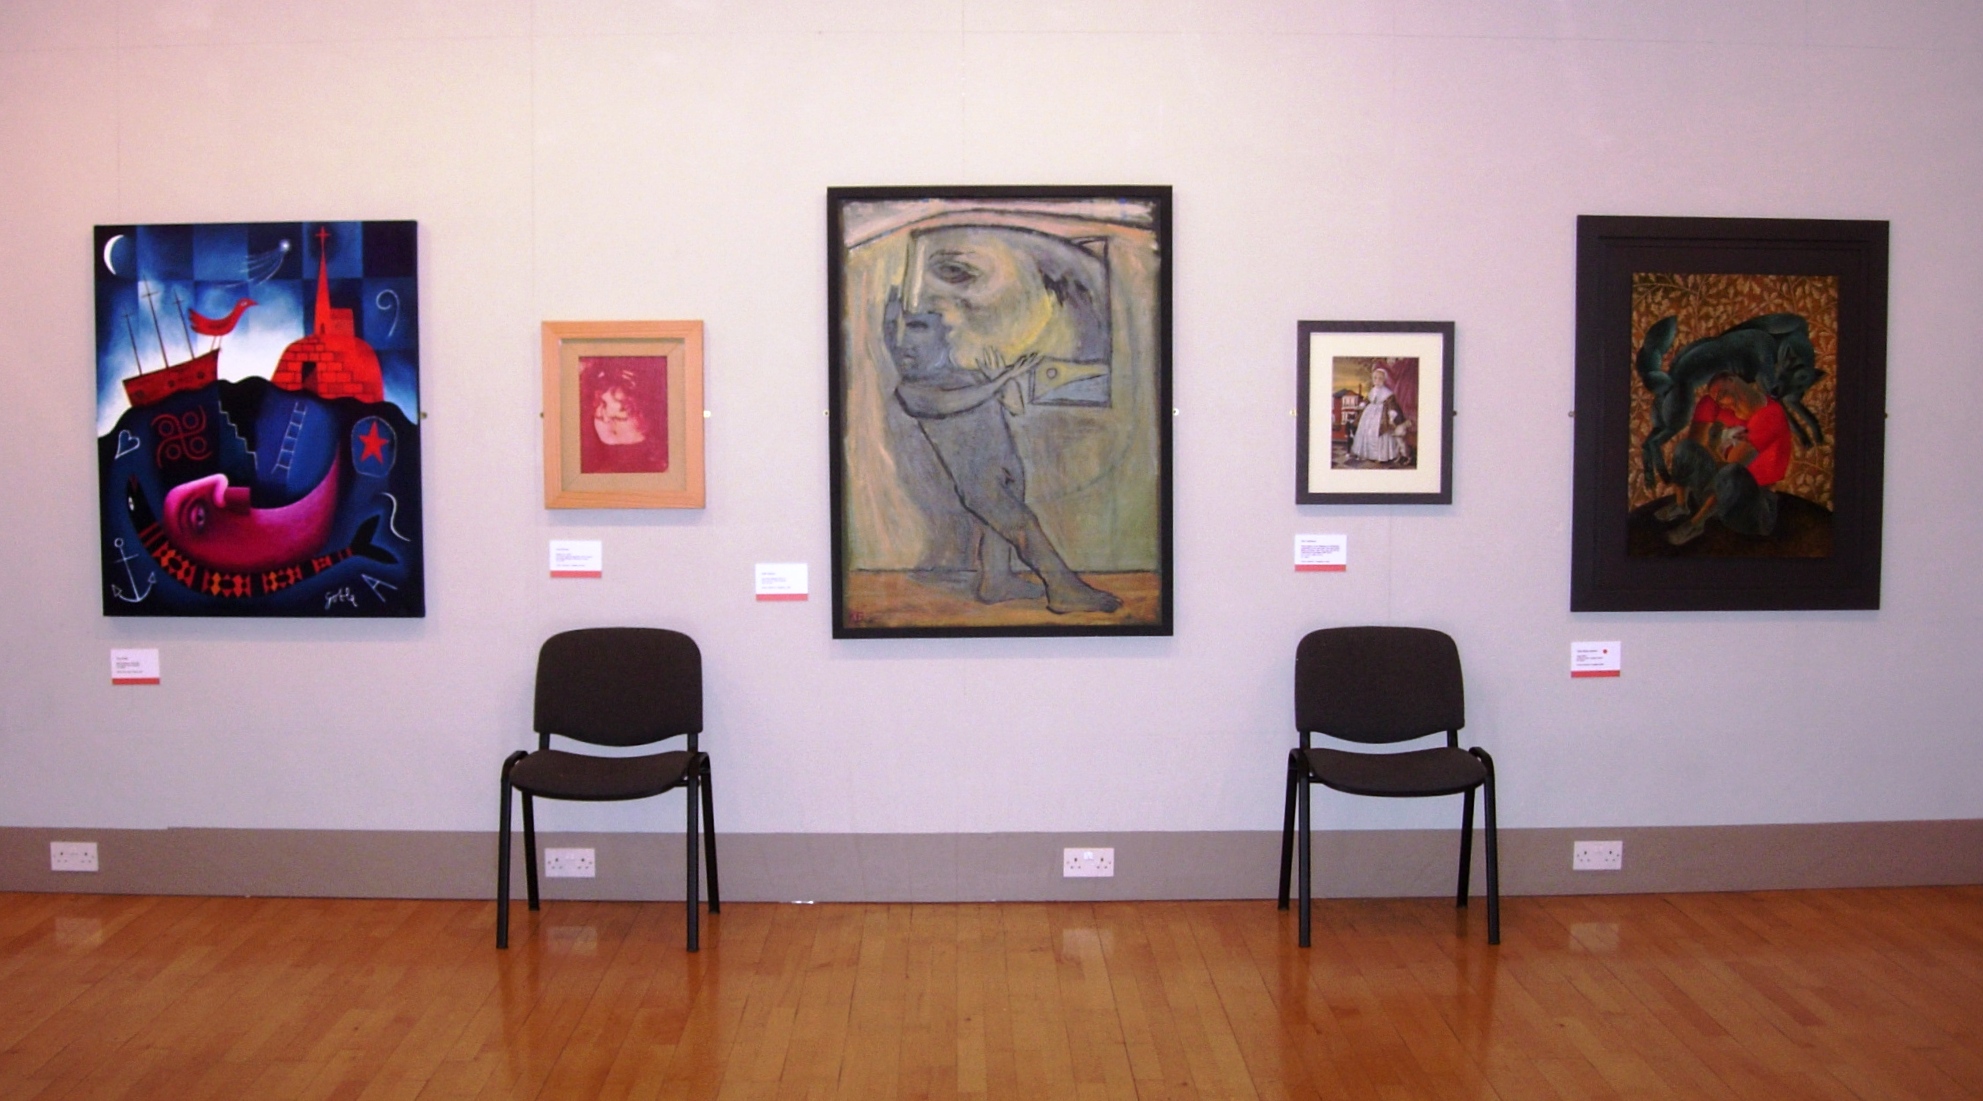 'Mapping the Welsh Group at 60': exhibits by Tony Goble, Paul Brewer, Keith Bayliss, Alan Salisbury and Clive Hicks-Jenkins, Royal Cambrian Academy 2009